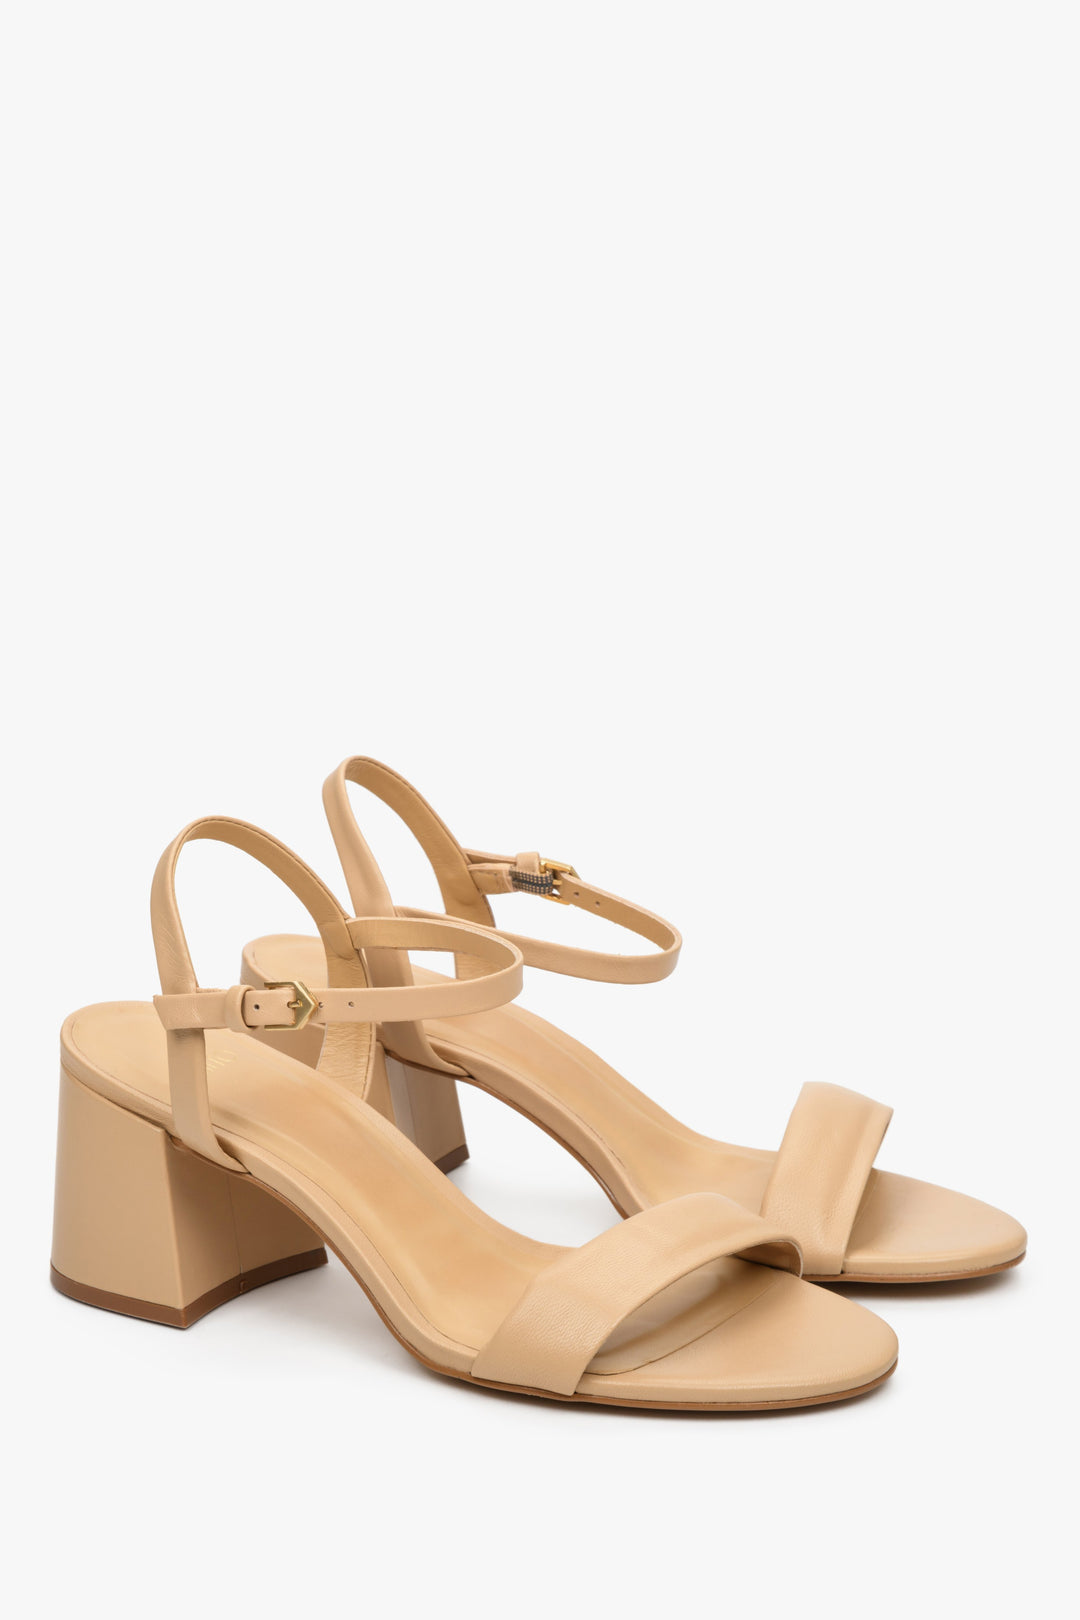 Women's beige leather sandals with a square heel by Estro - close-up on the side line of the shoe.